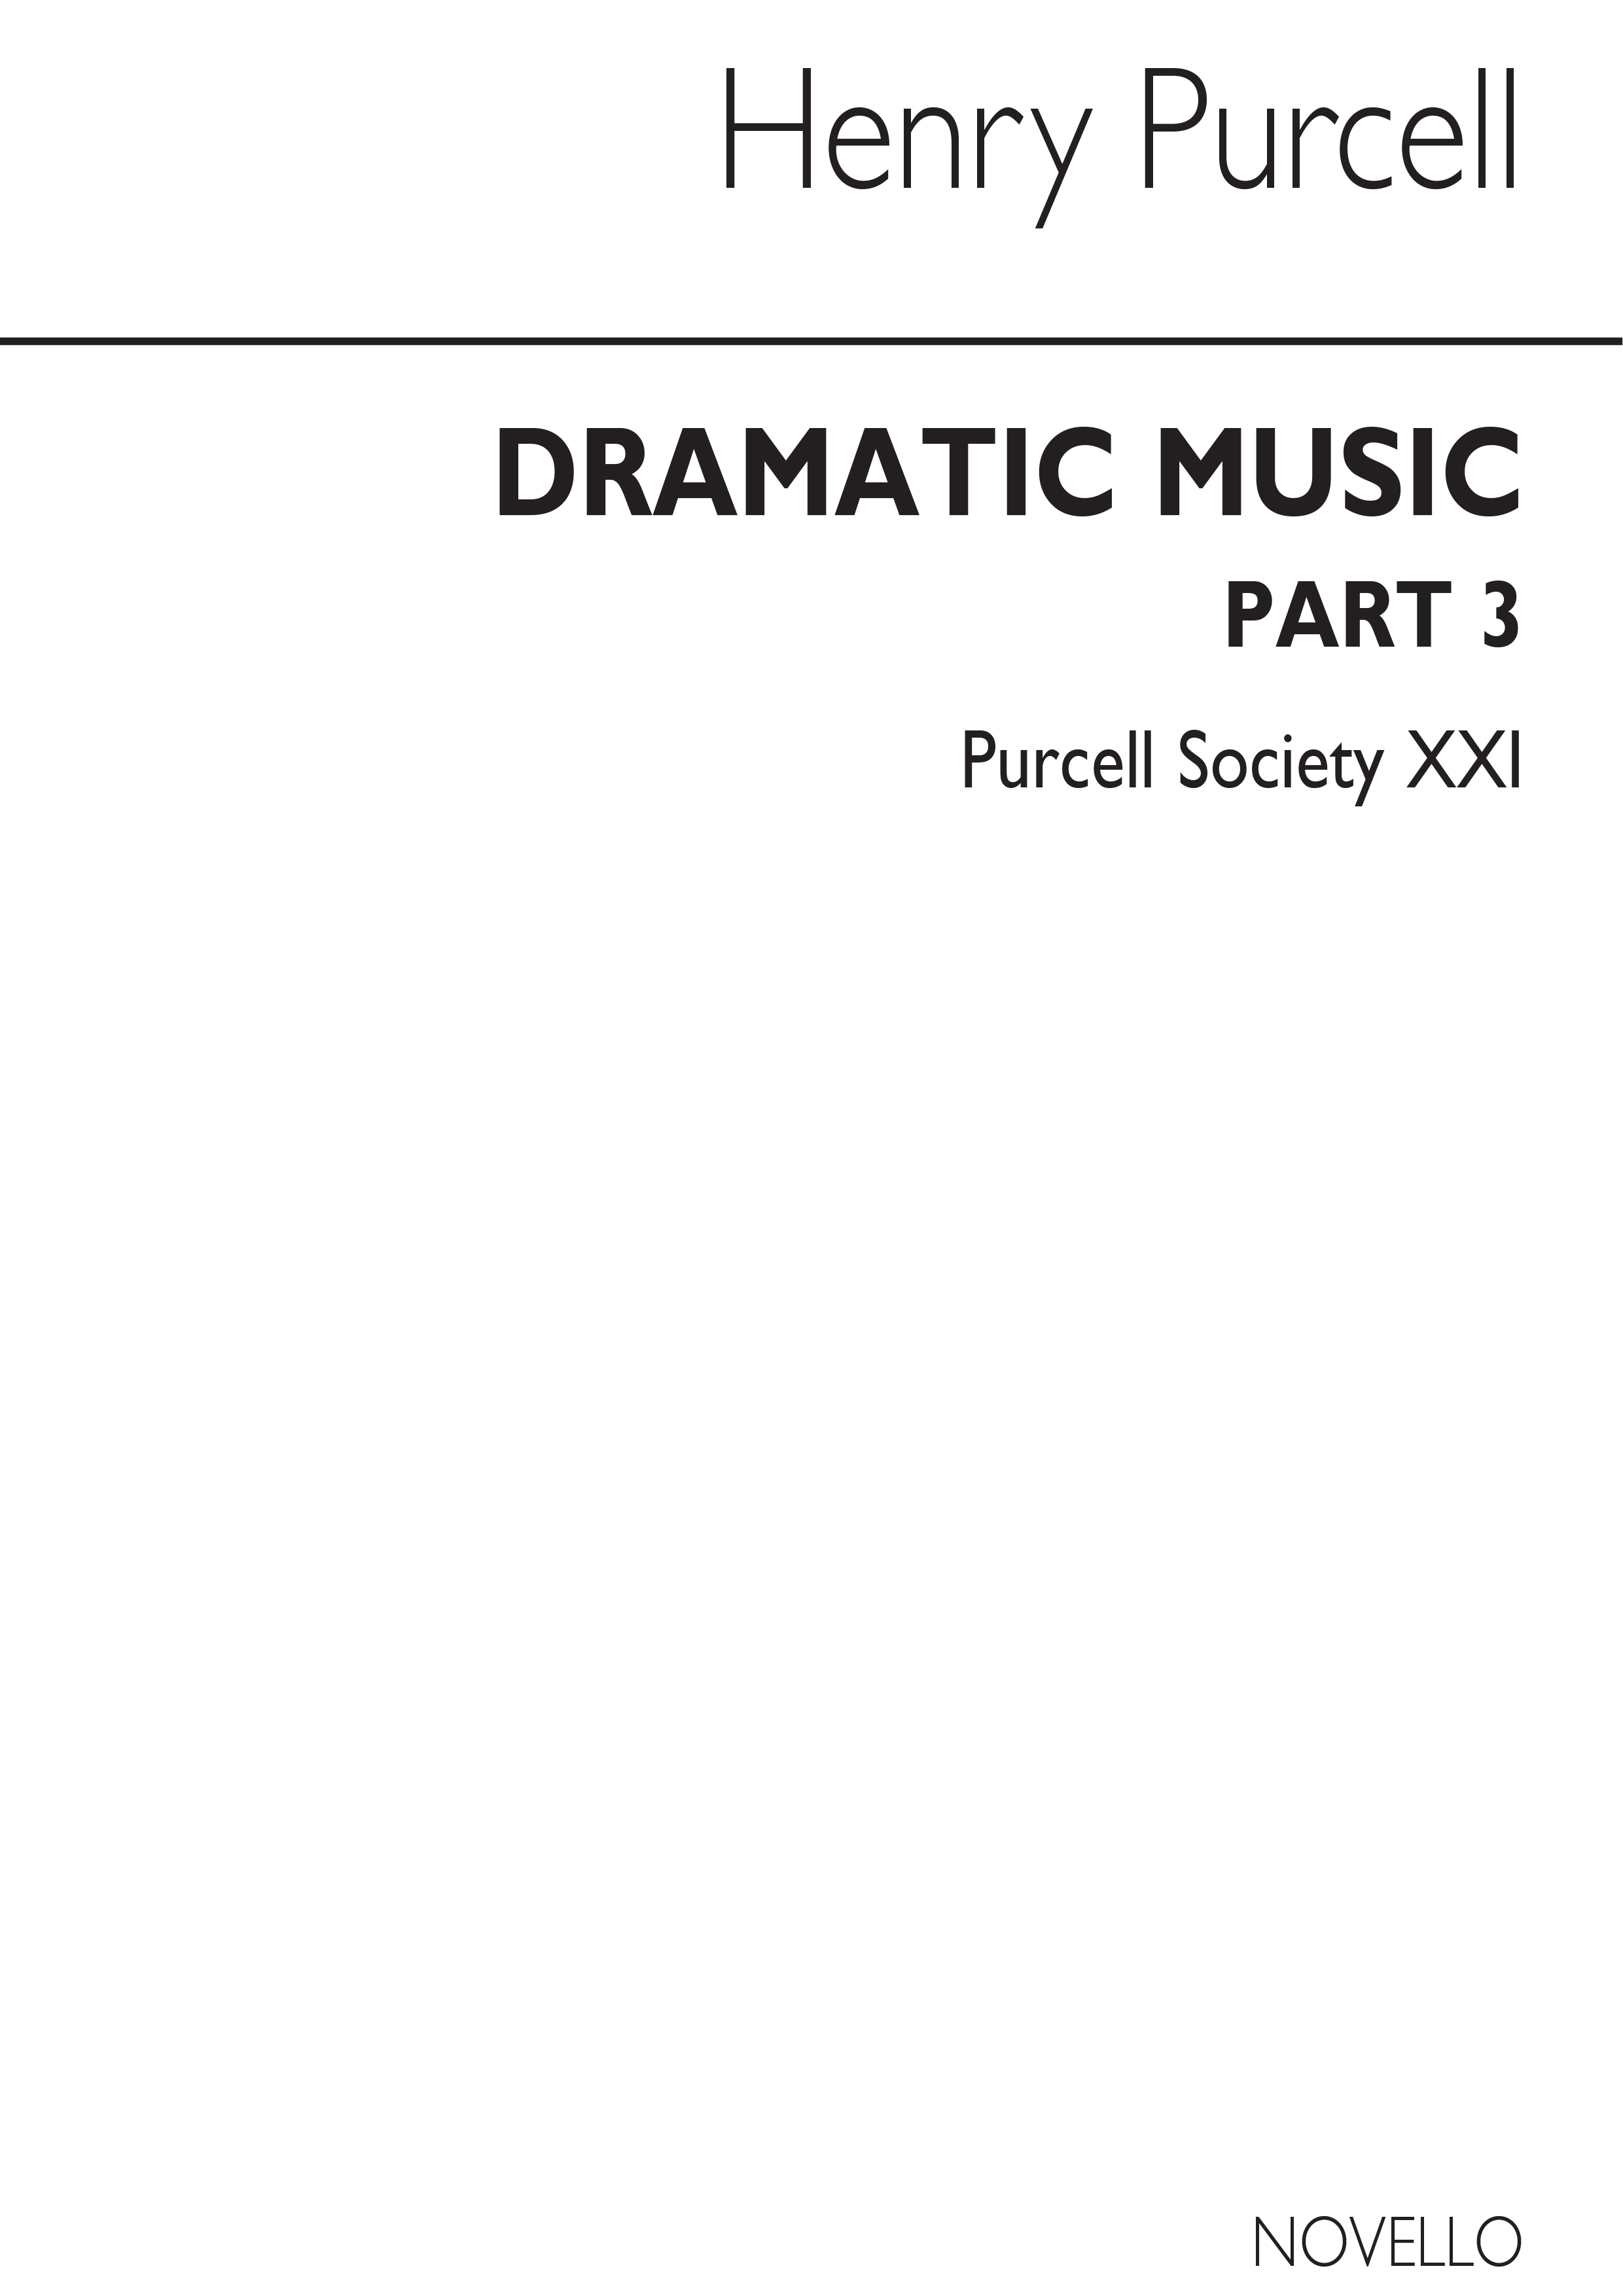 Purcell Society Volume 21 - Dramatic Music Part 3 (Original Engraving)